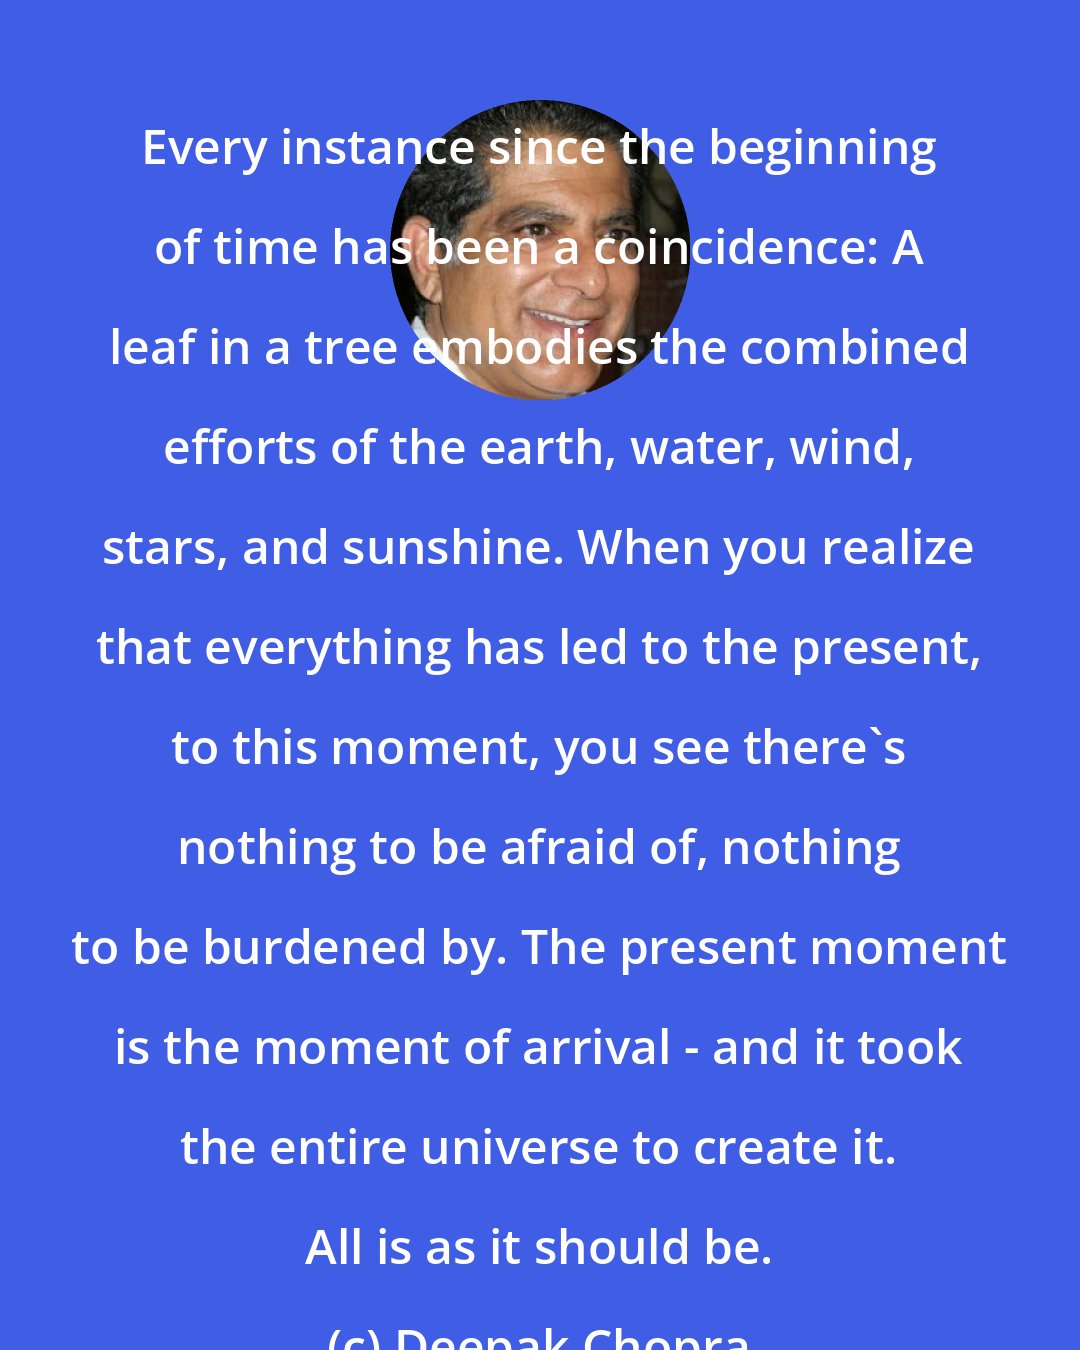 Deepak Chopra: Every instance since the beginning of time has been a coincidence: A leaf in a tree embodies the combined efforts of the earth, water, wind, stars, and sunshine. When you realize that everything has led to the present, to this moment, you see there's nothing to be afraid of, nothing to be burdened by. The present moment is the moment of arrival - and it took the entire universe to create it. All is as it should be.